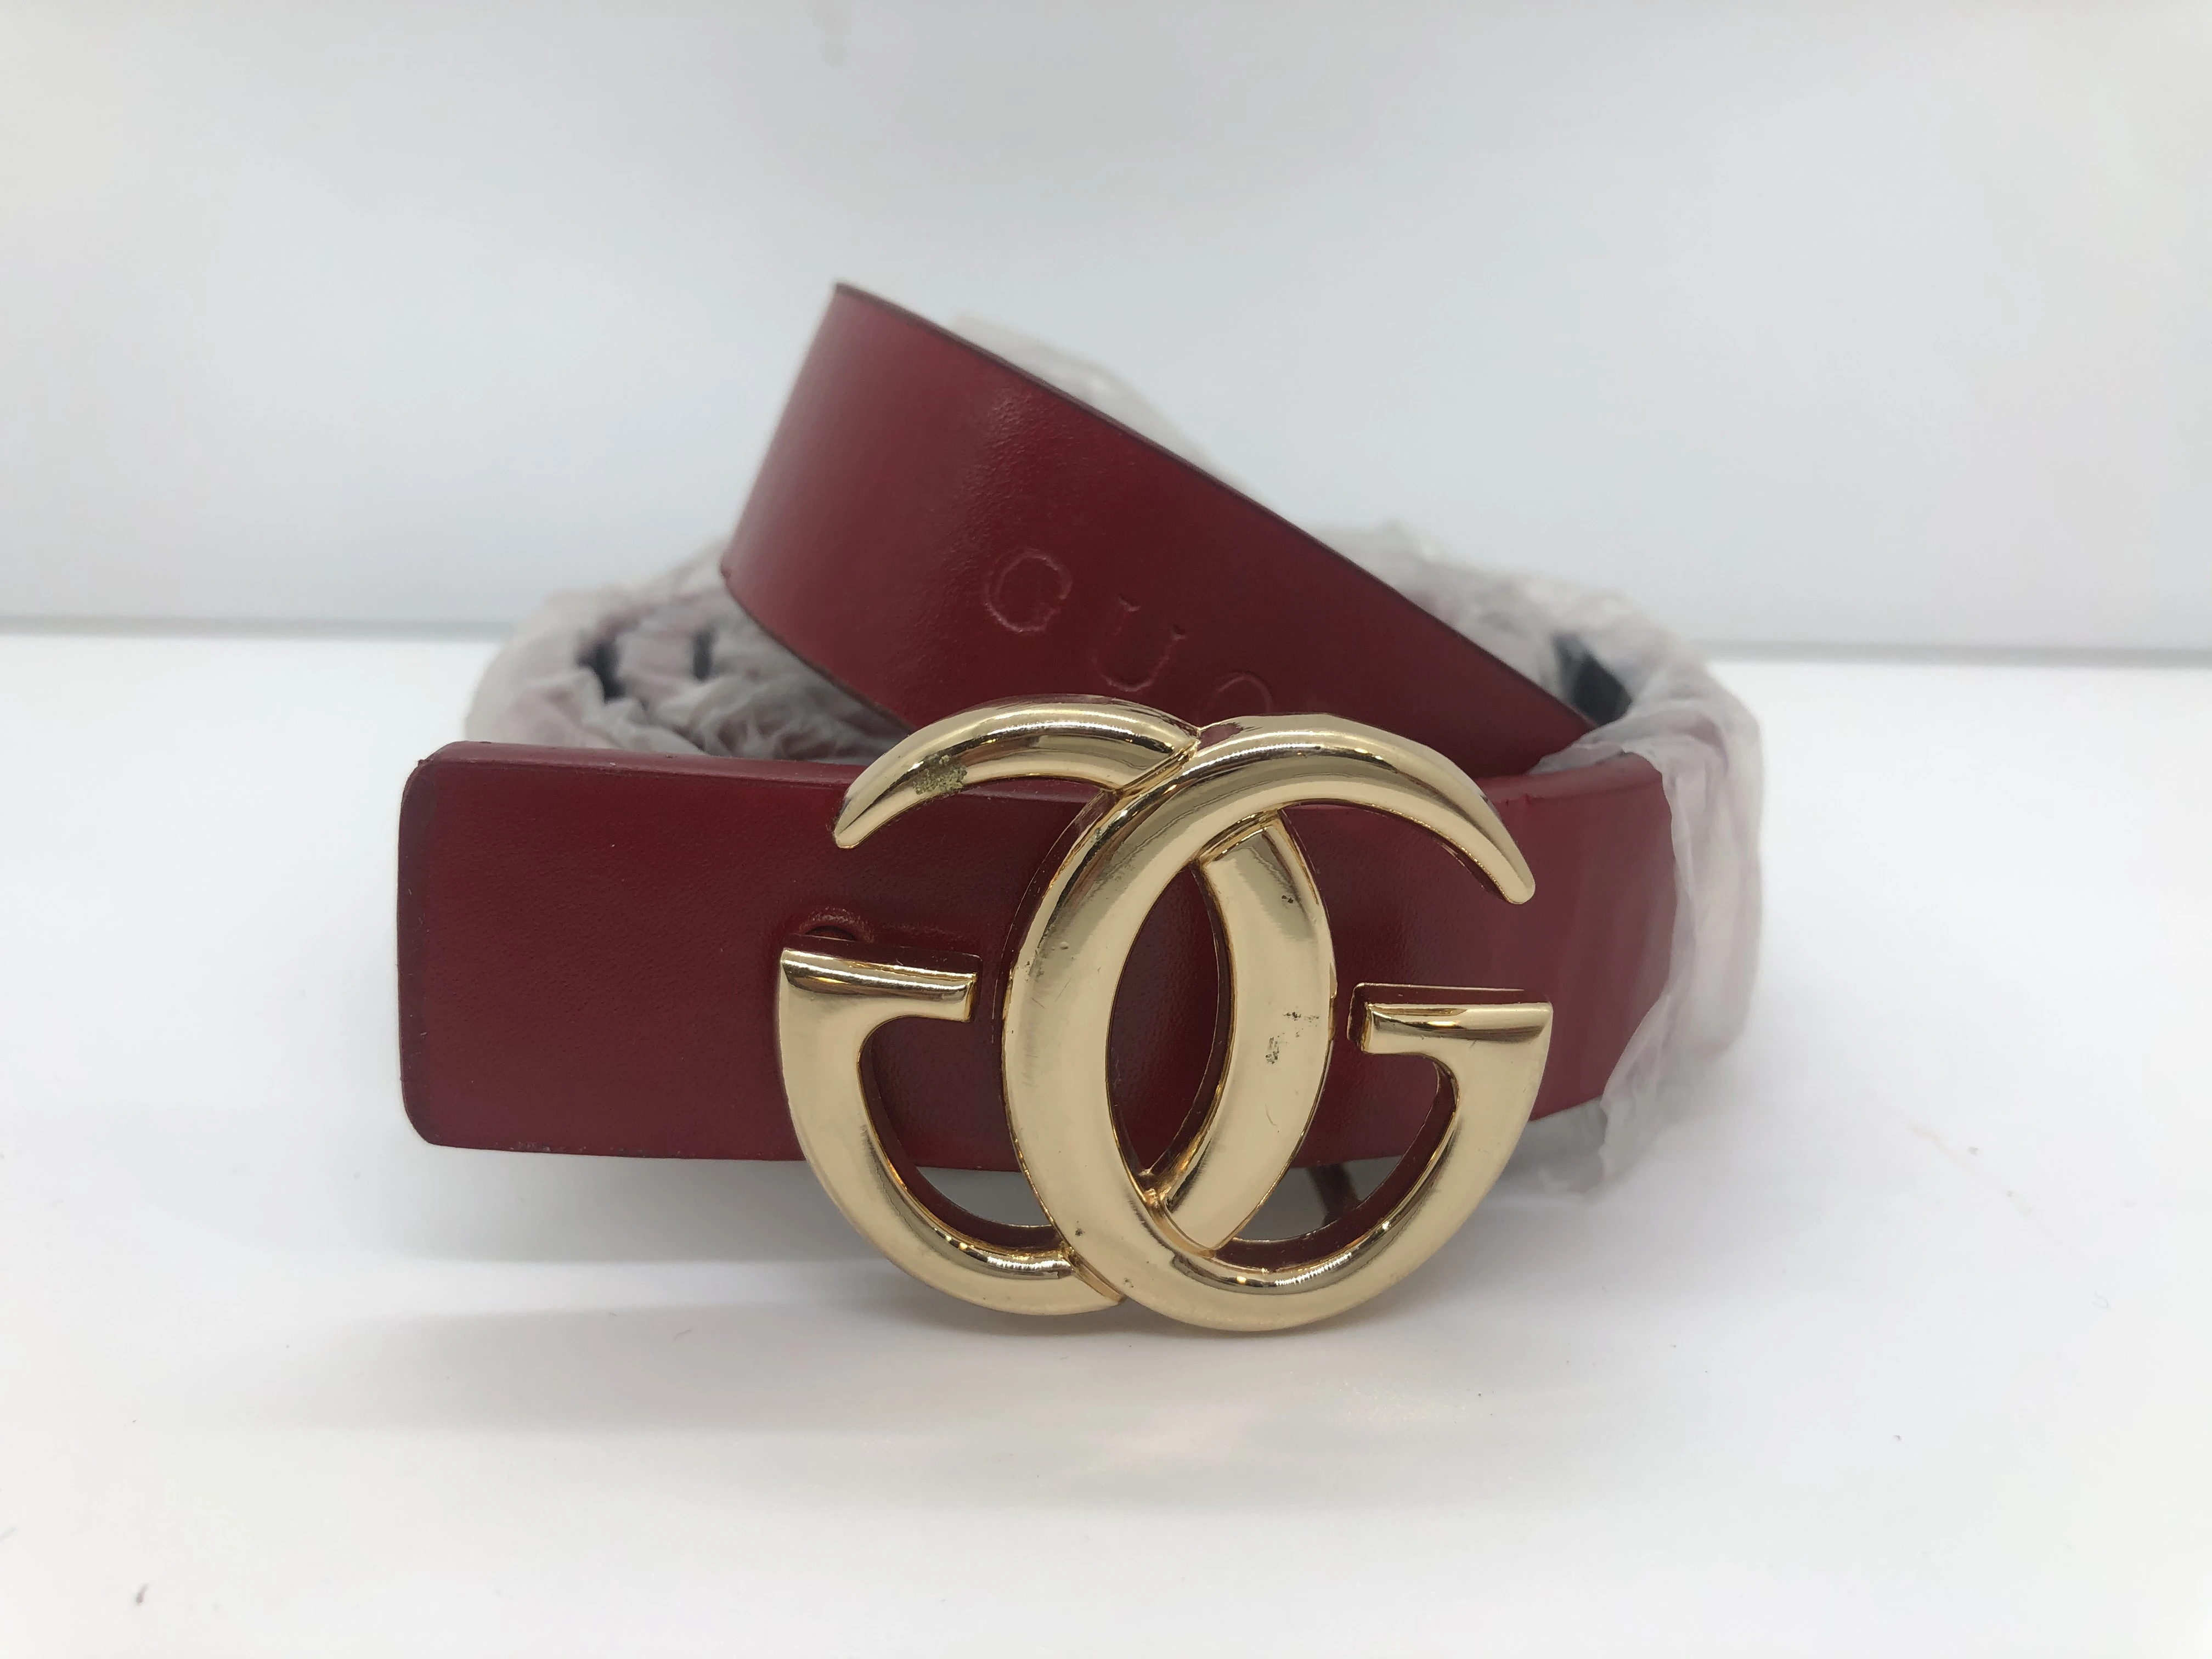 Gucci women's belt, maroon, golden buckle, finished with the brand's logo